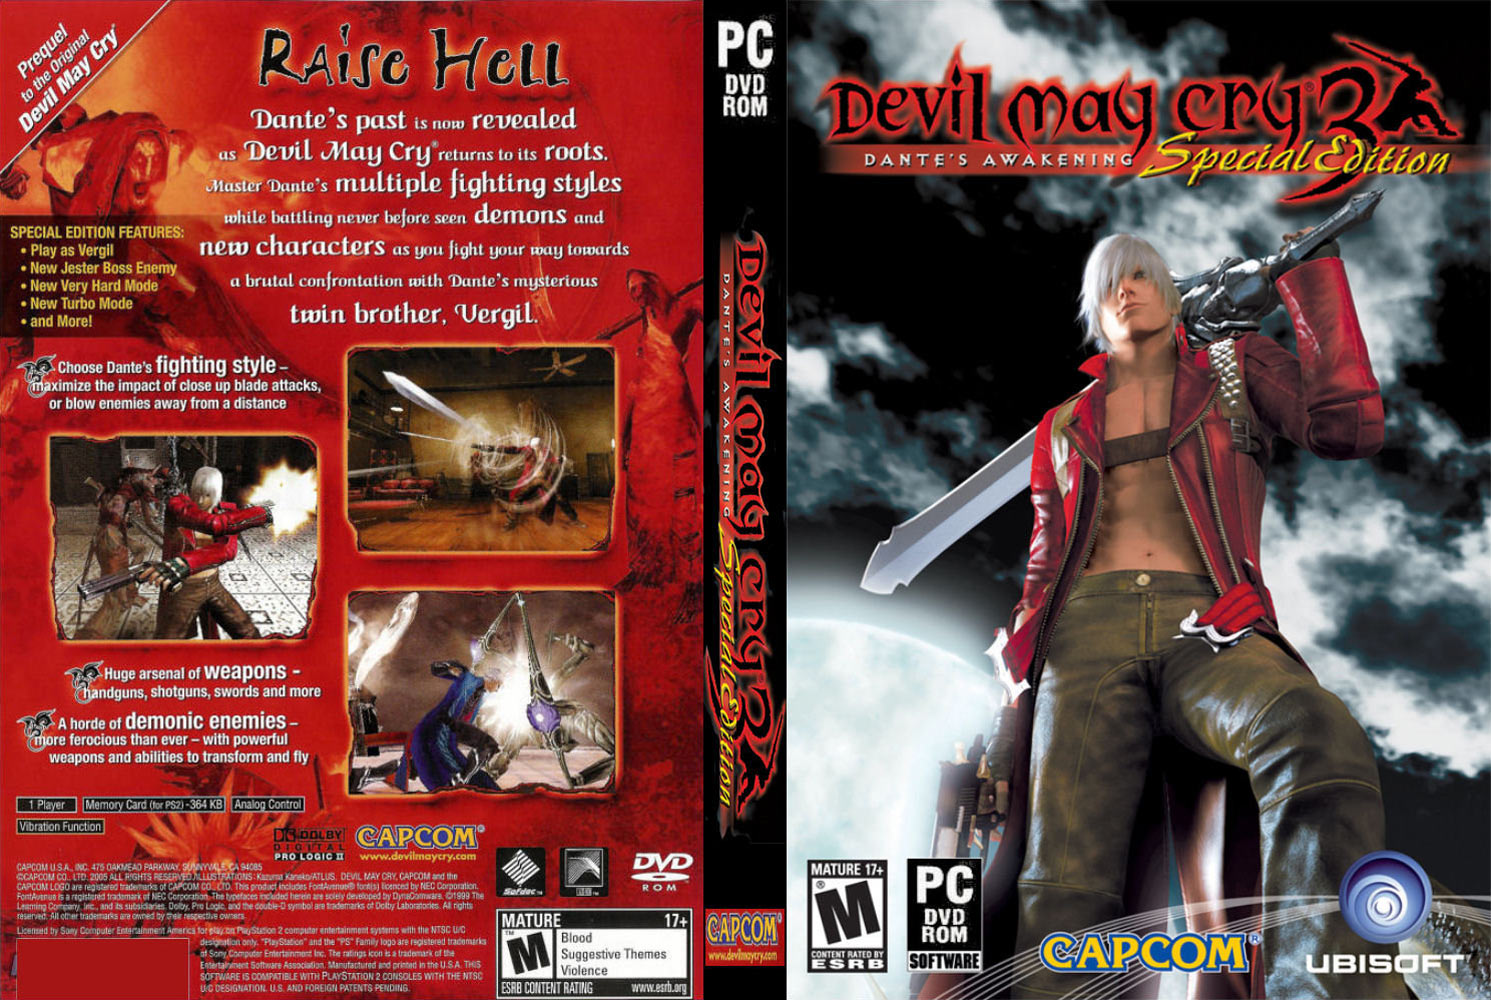 Devil May Cry 3: Dante's Awakening Special Edition - DVD obal